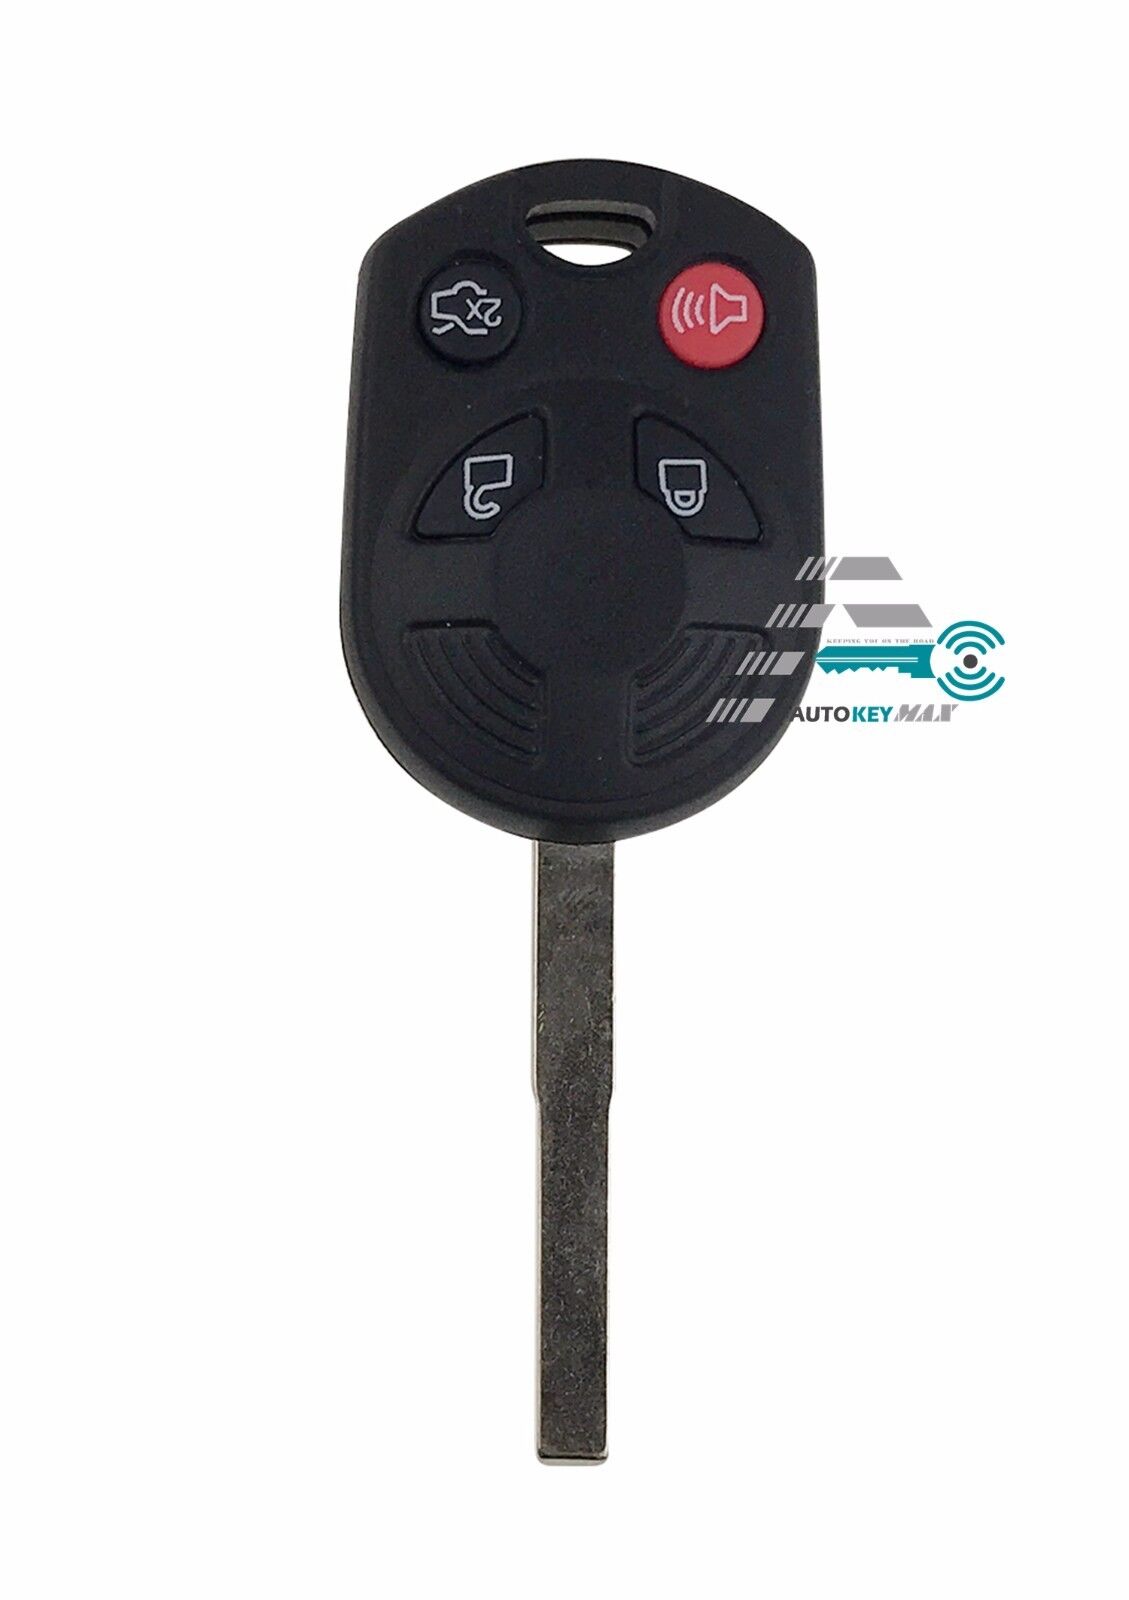 New 4 Button Remote Key For 2012 2013 2014 2015 2016 Ford Focus 164-R8046